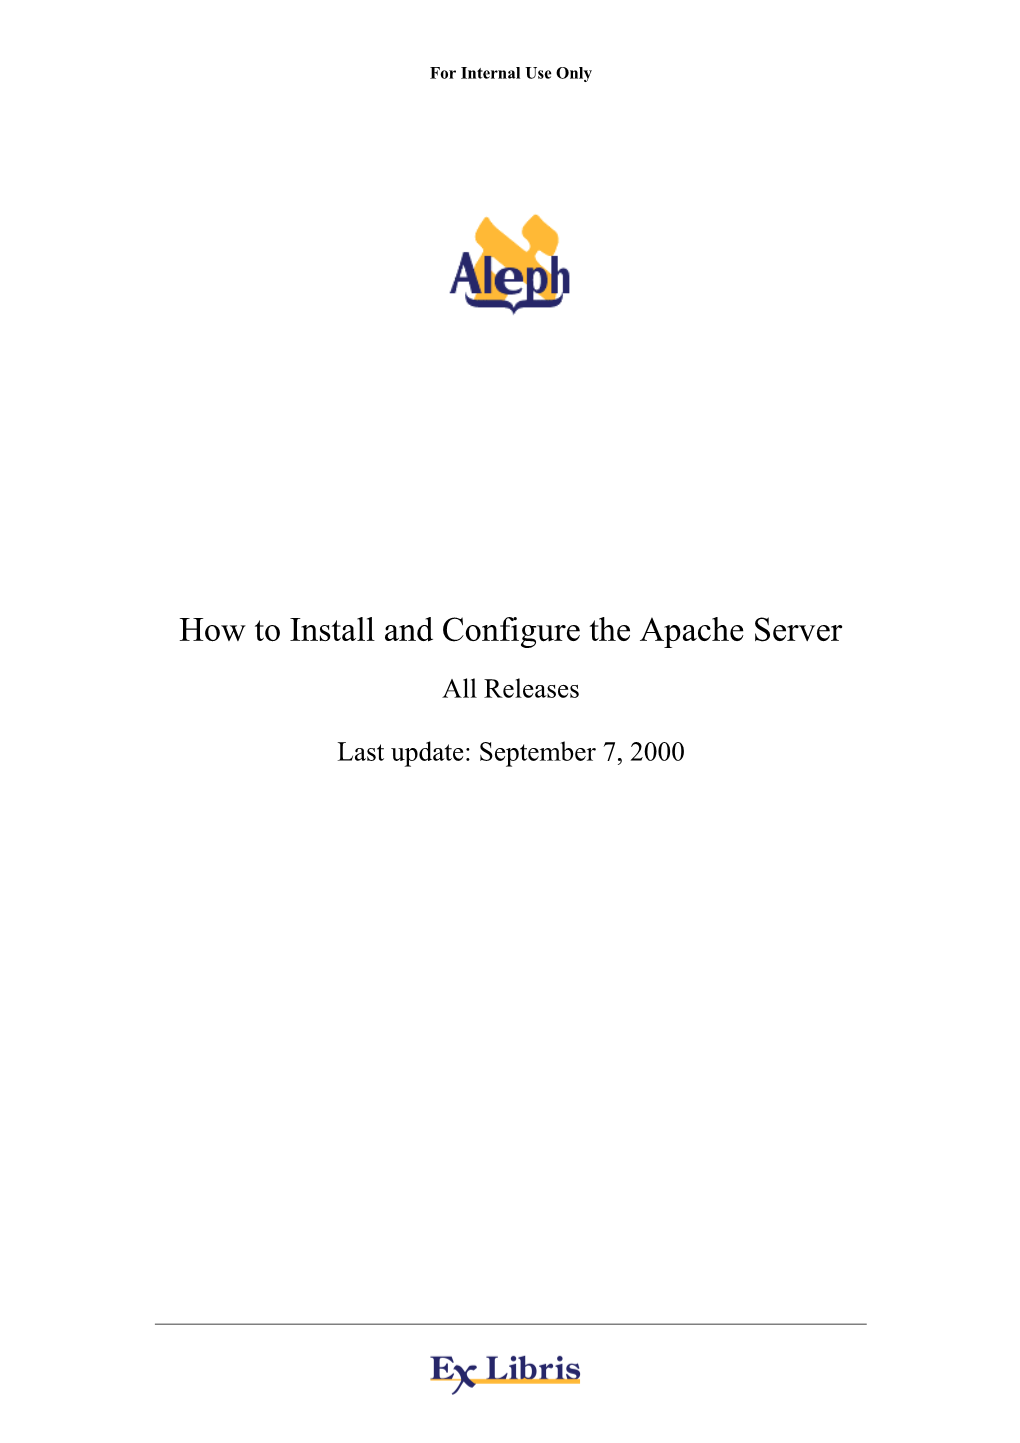 How to Install and Configure the Apache Server